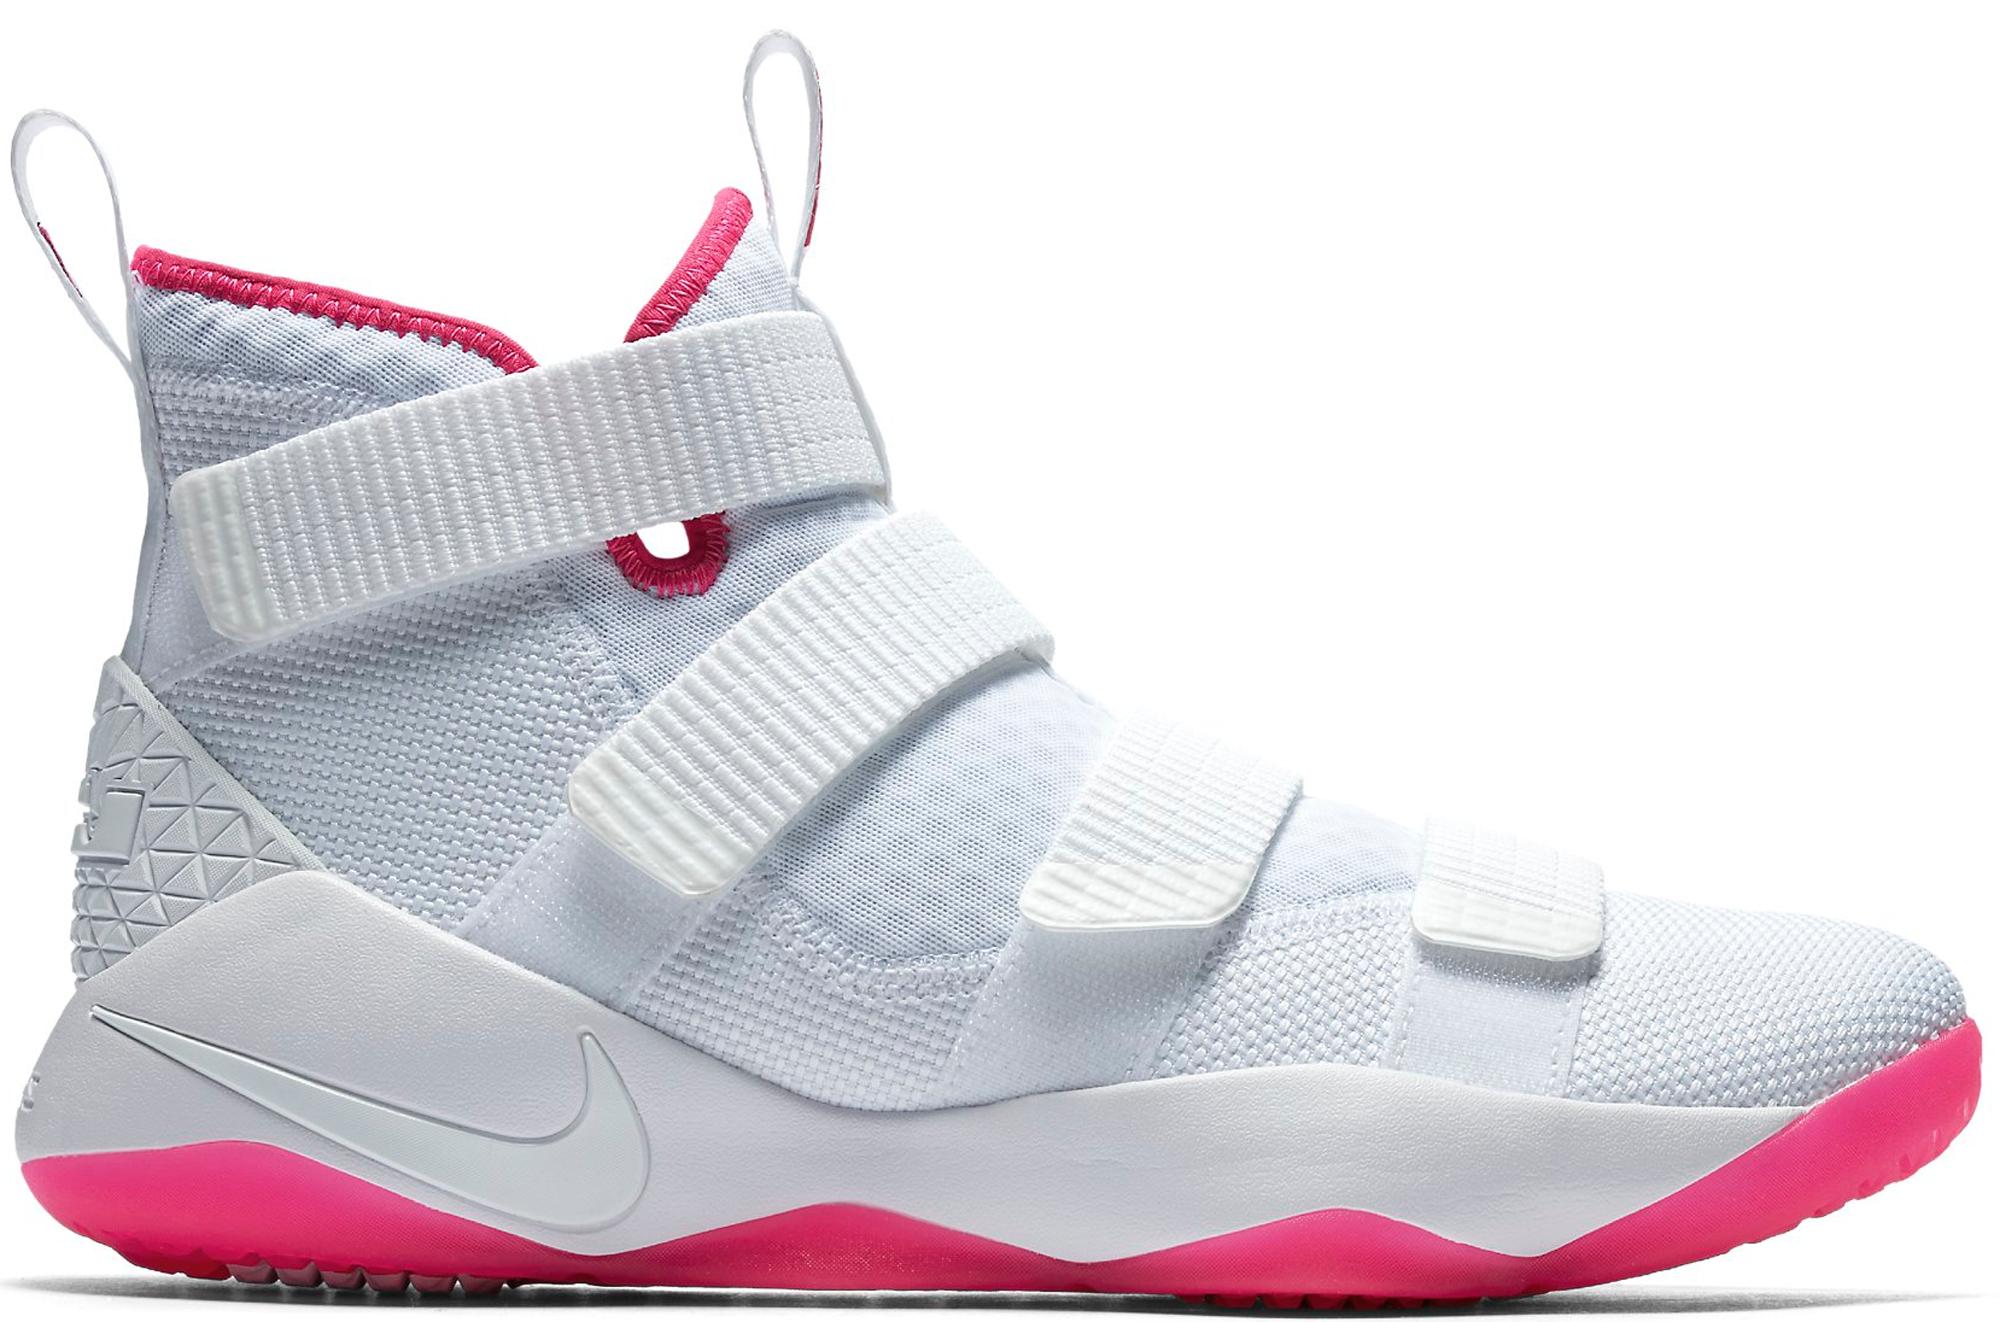 lebrons pink and white